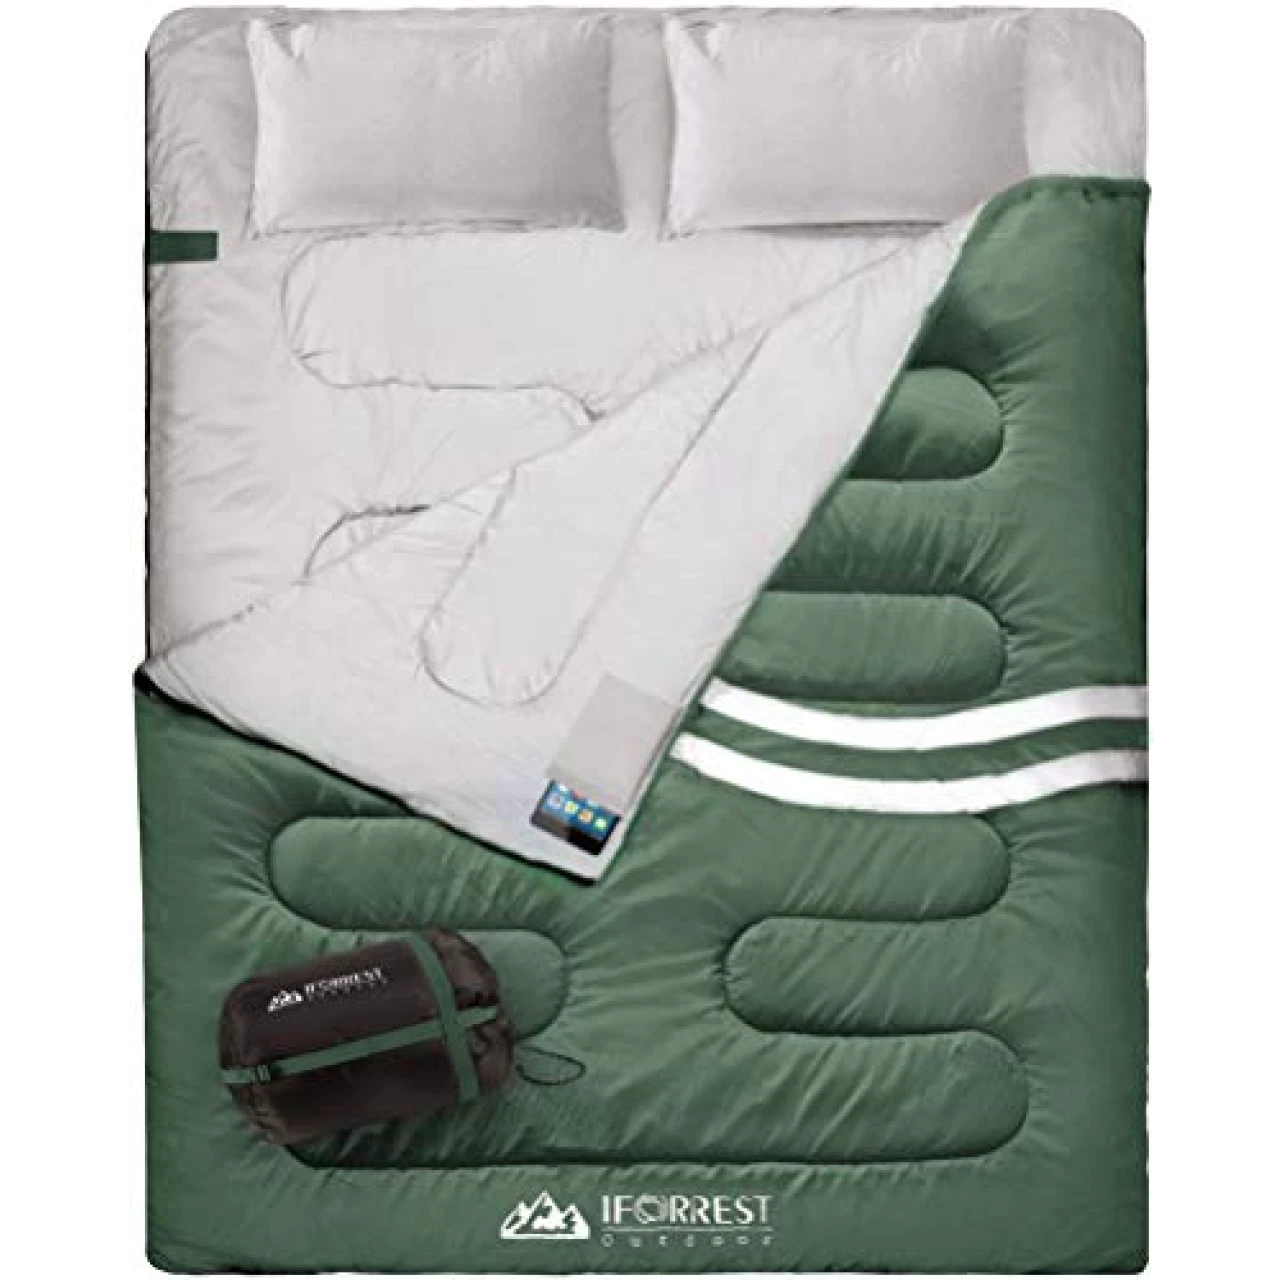 IFORREST Double Sleeping Bag for Adults - 2 Person Cold Weather(3-4 Seasons) Camping Bed, Extra-Wide &amp; Warm - Queen Size XL